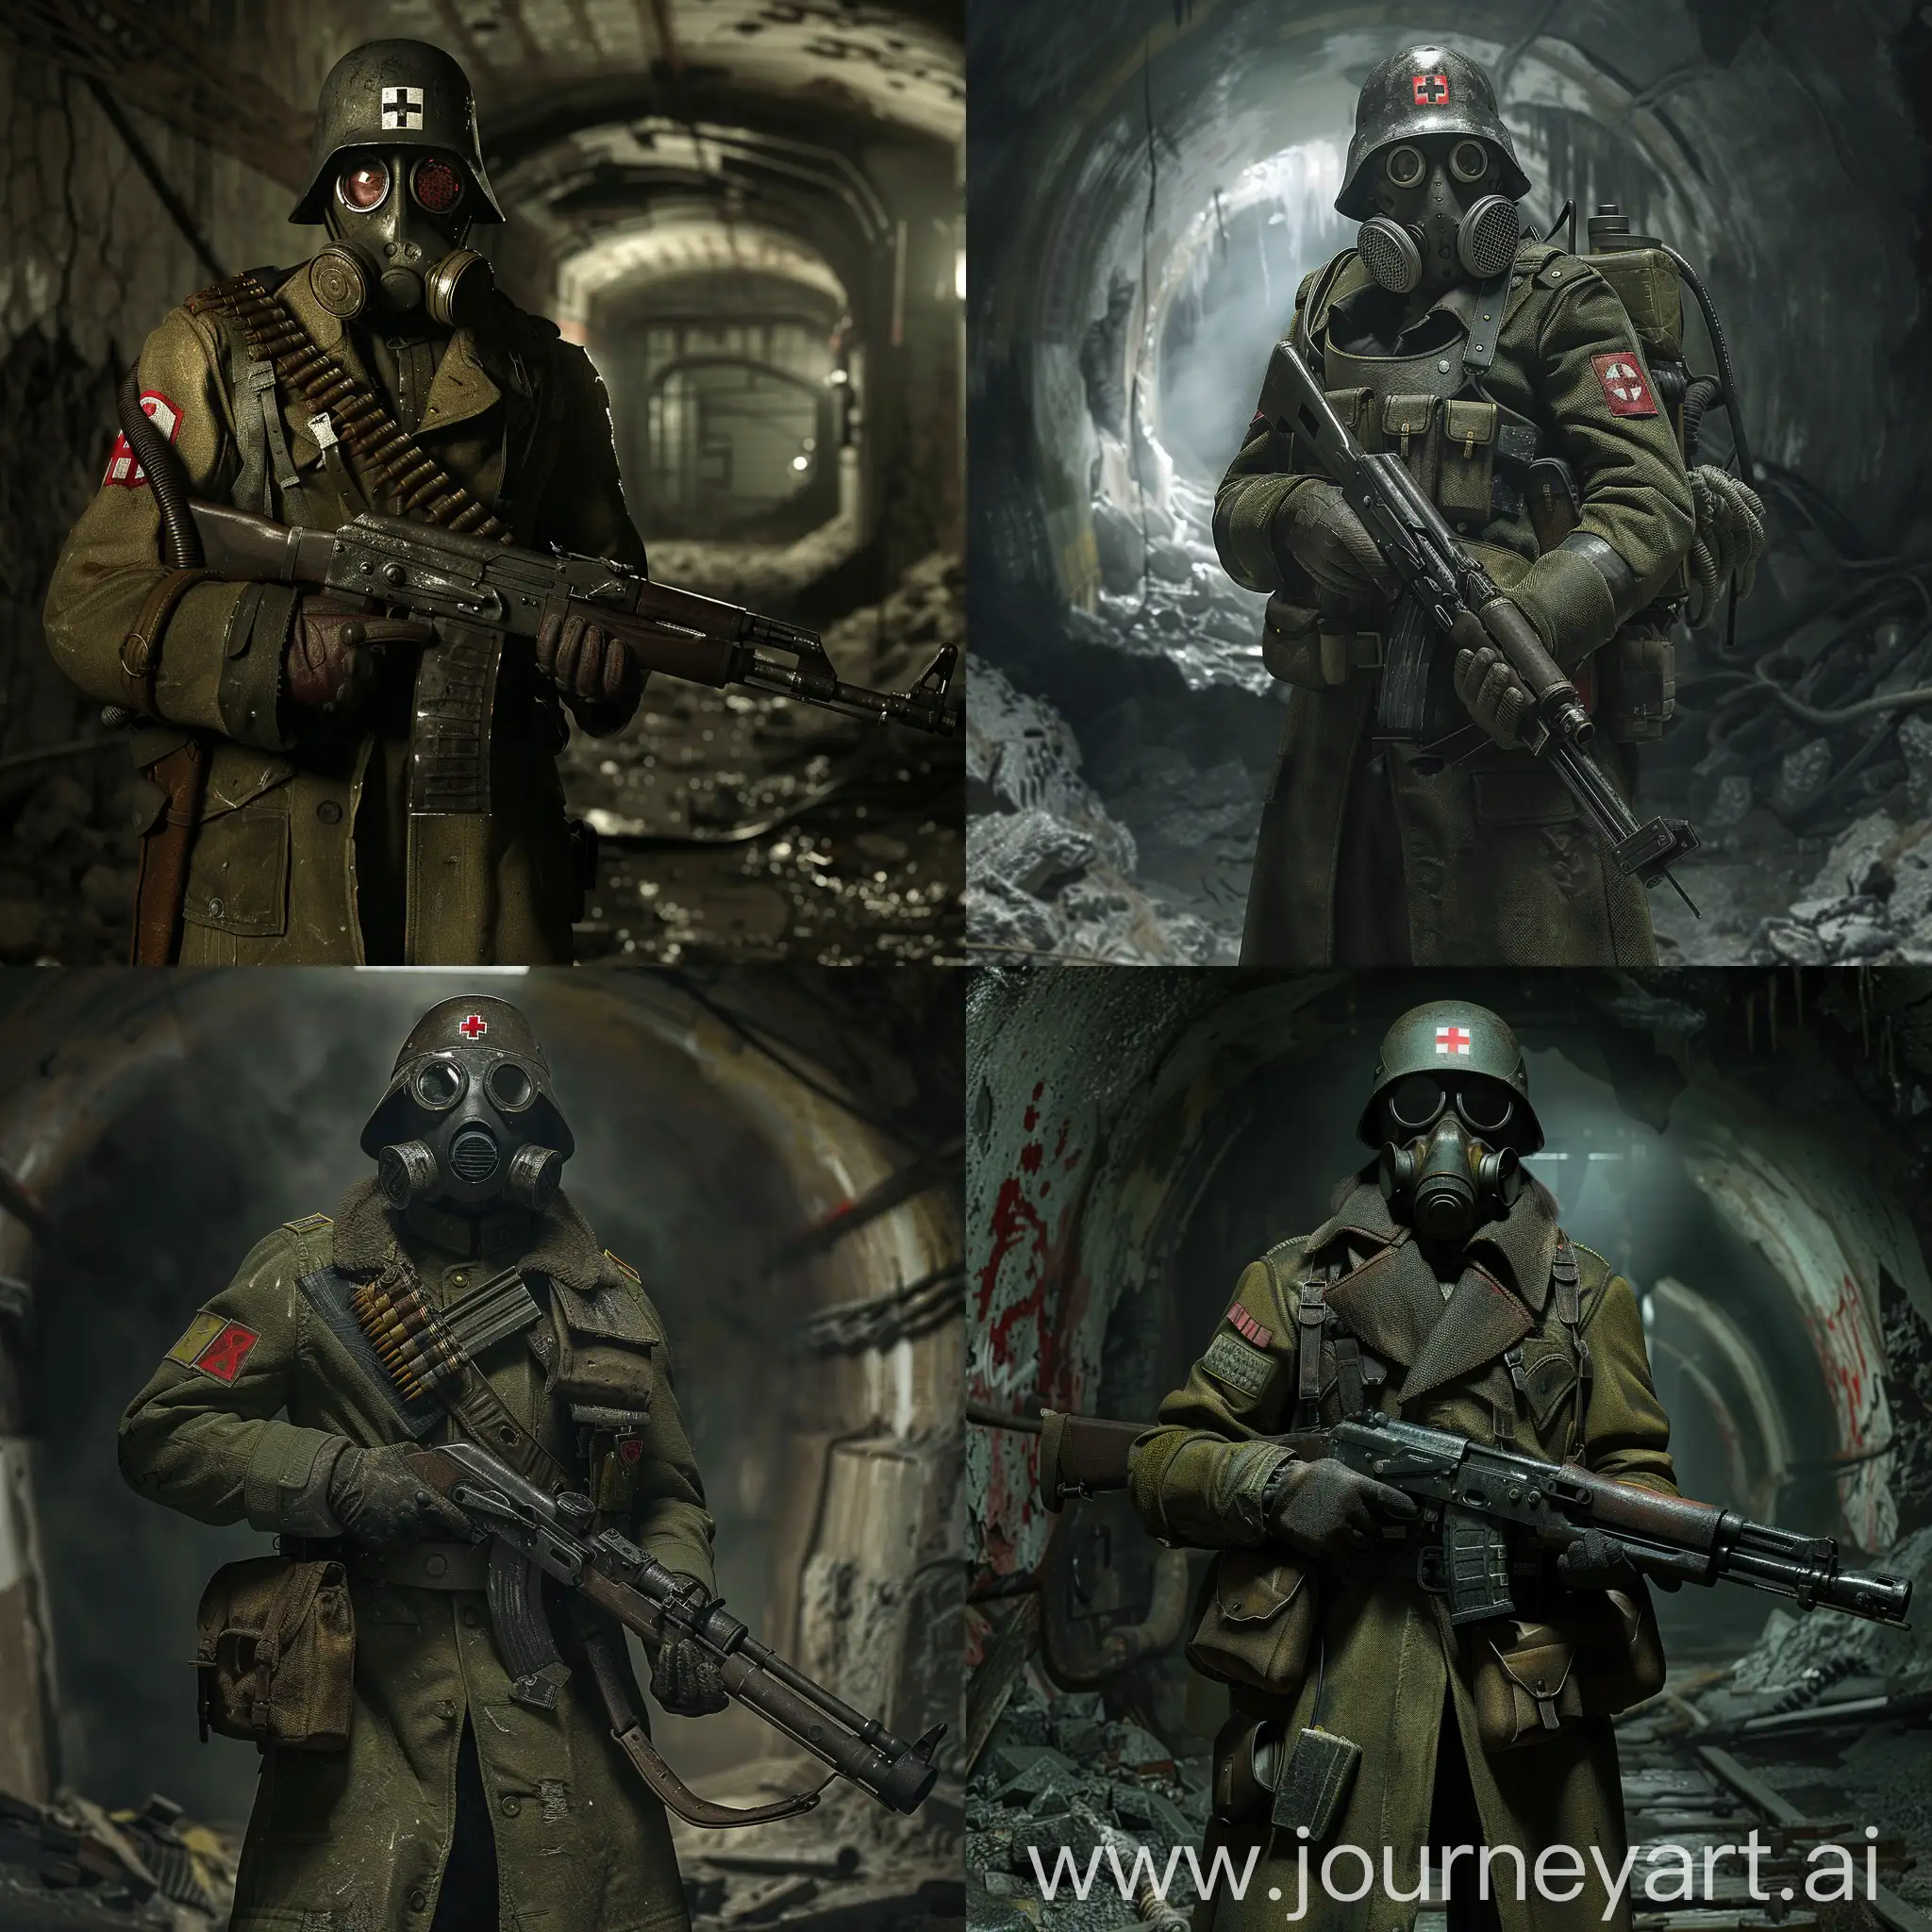 PostApocalyptic-Survivor-with-Soviet-Sniper-Rifle-in-Abandoned-Catacombs